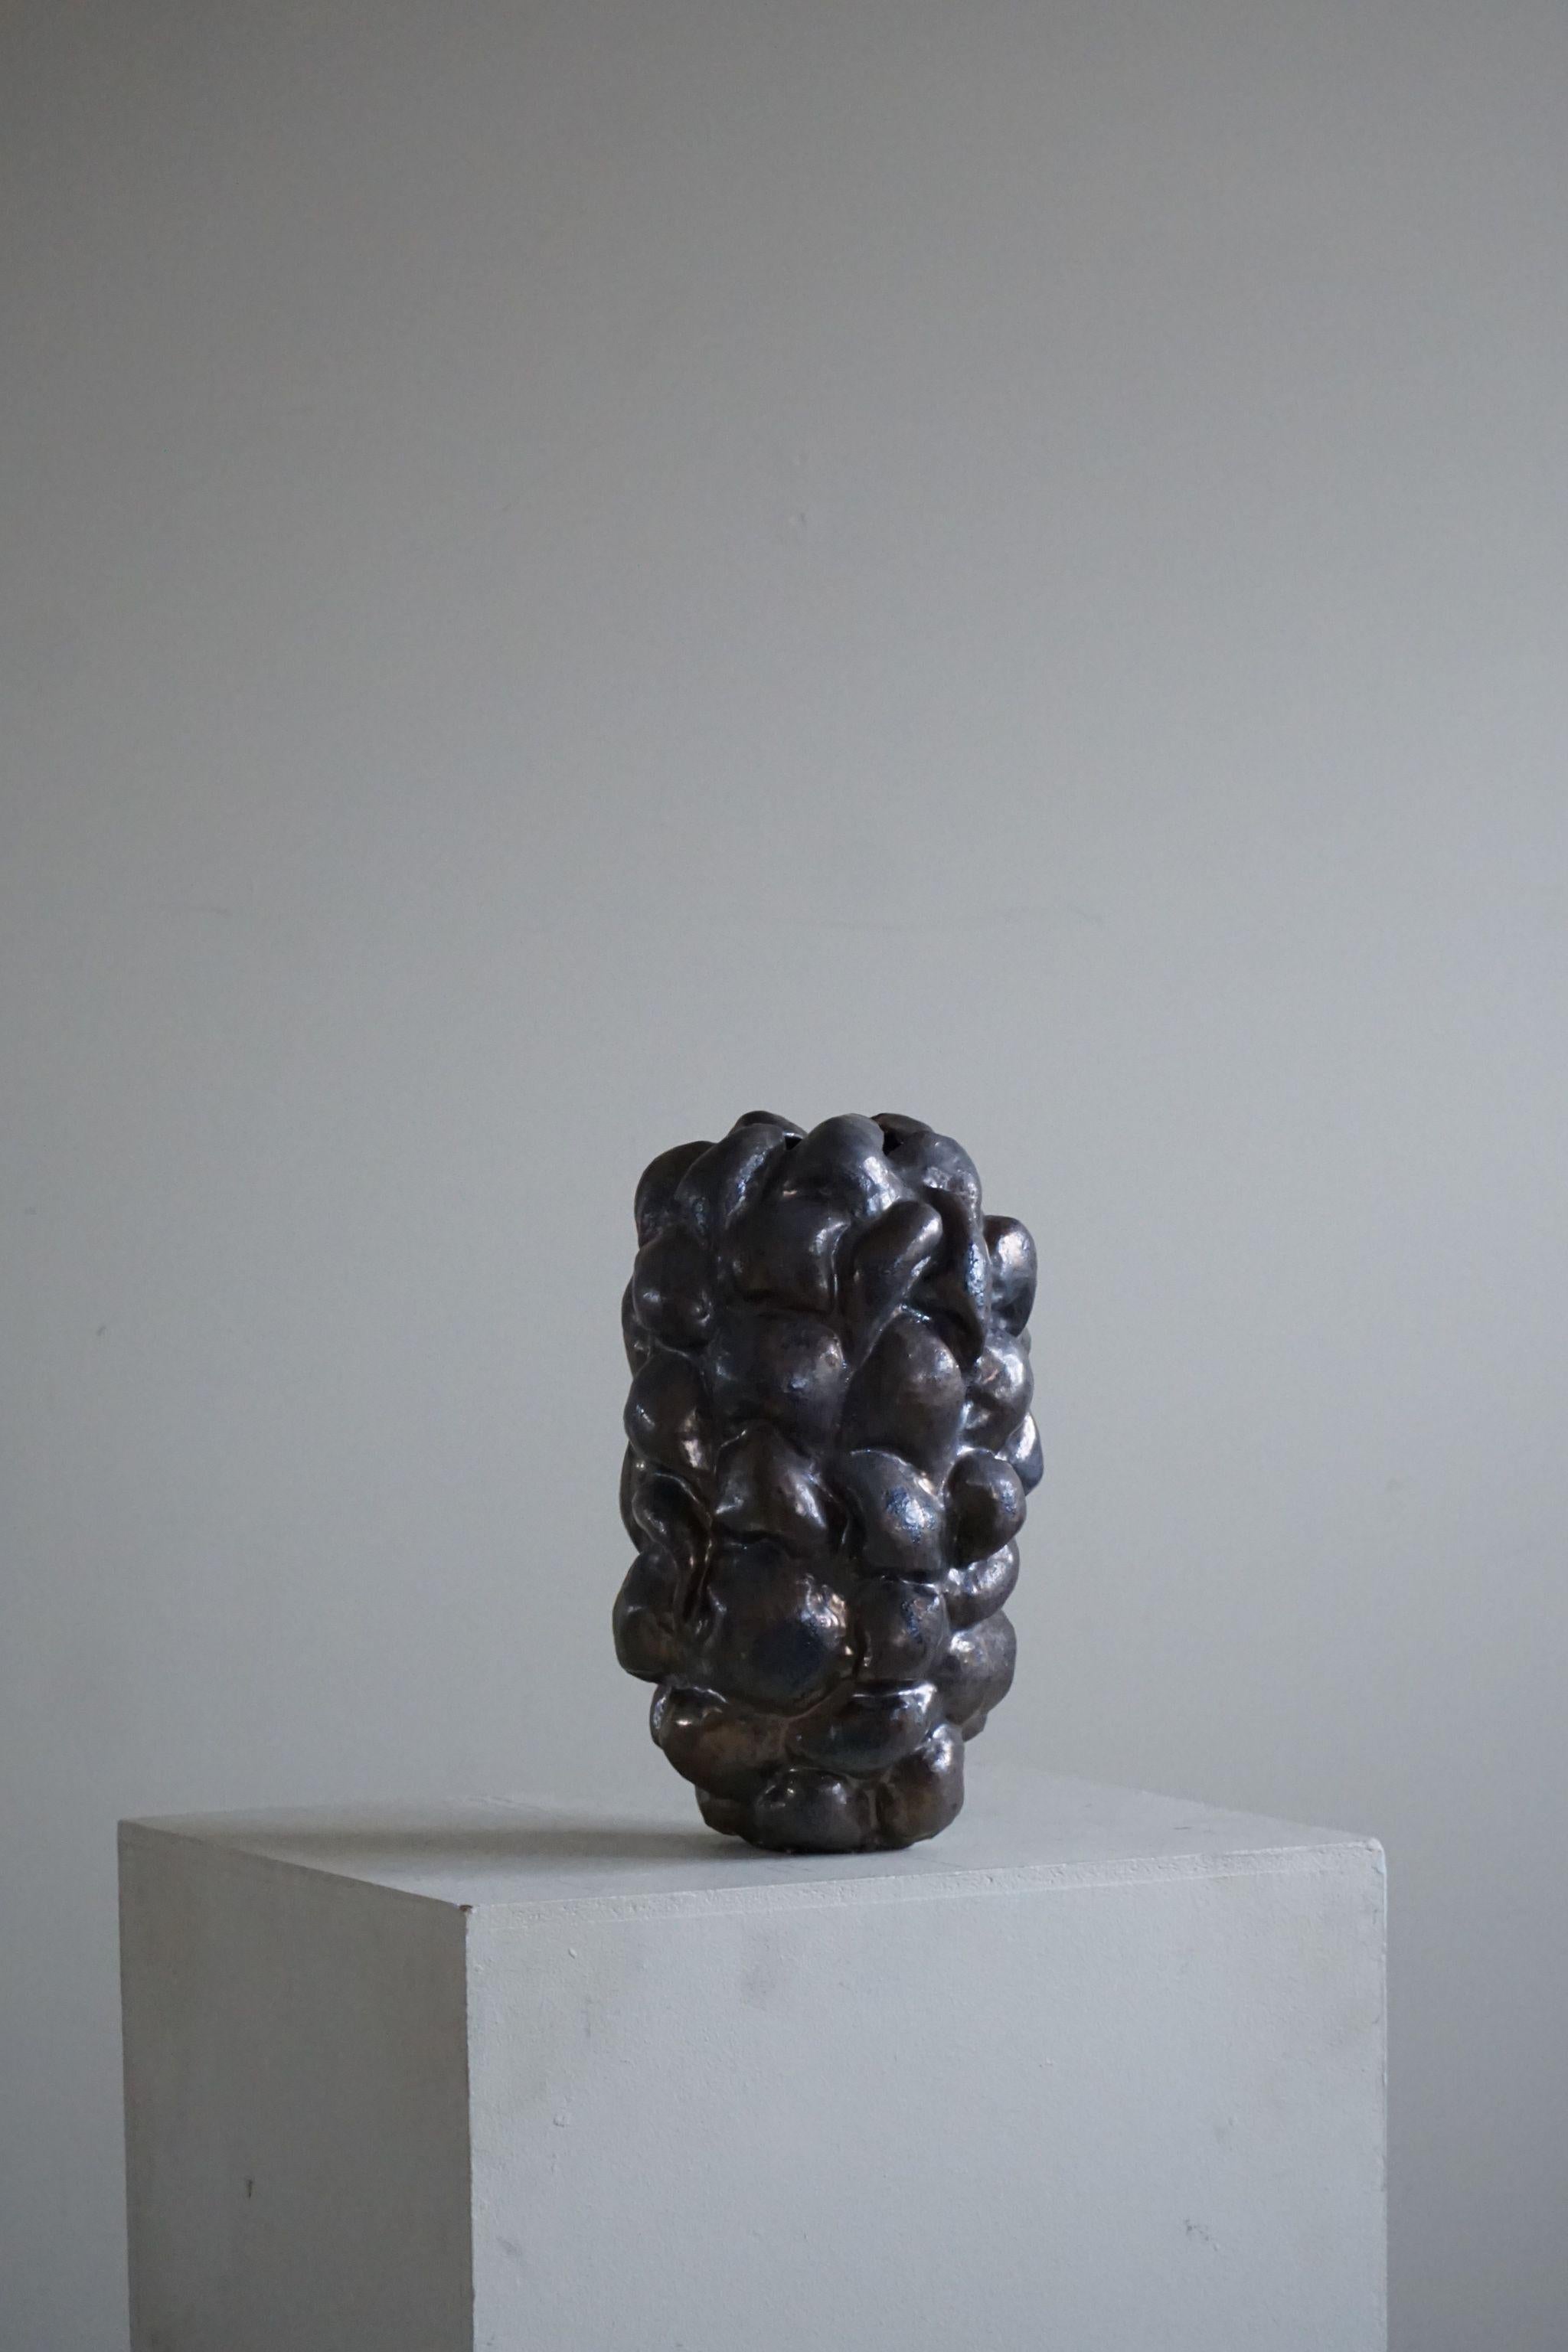 Large ceramic vase in bronze glaze, made by Danish artist Ole Victor, 2021.

Ole Victor is a Danish artist who attended Art Academy between 1975 and 1980. He creates artworks and ceramics ever since. Hes been exhibited in Galerie 26 on